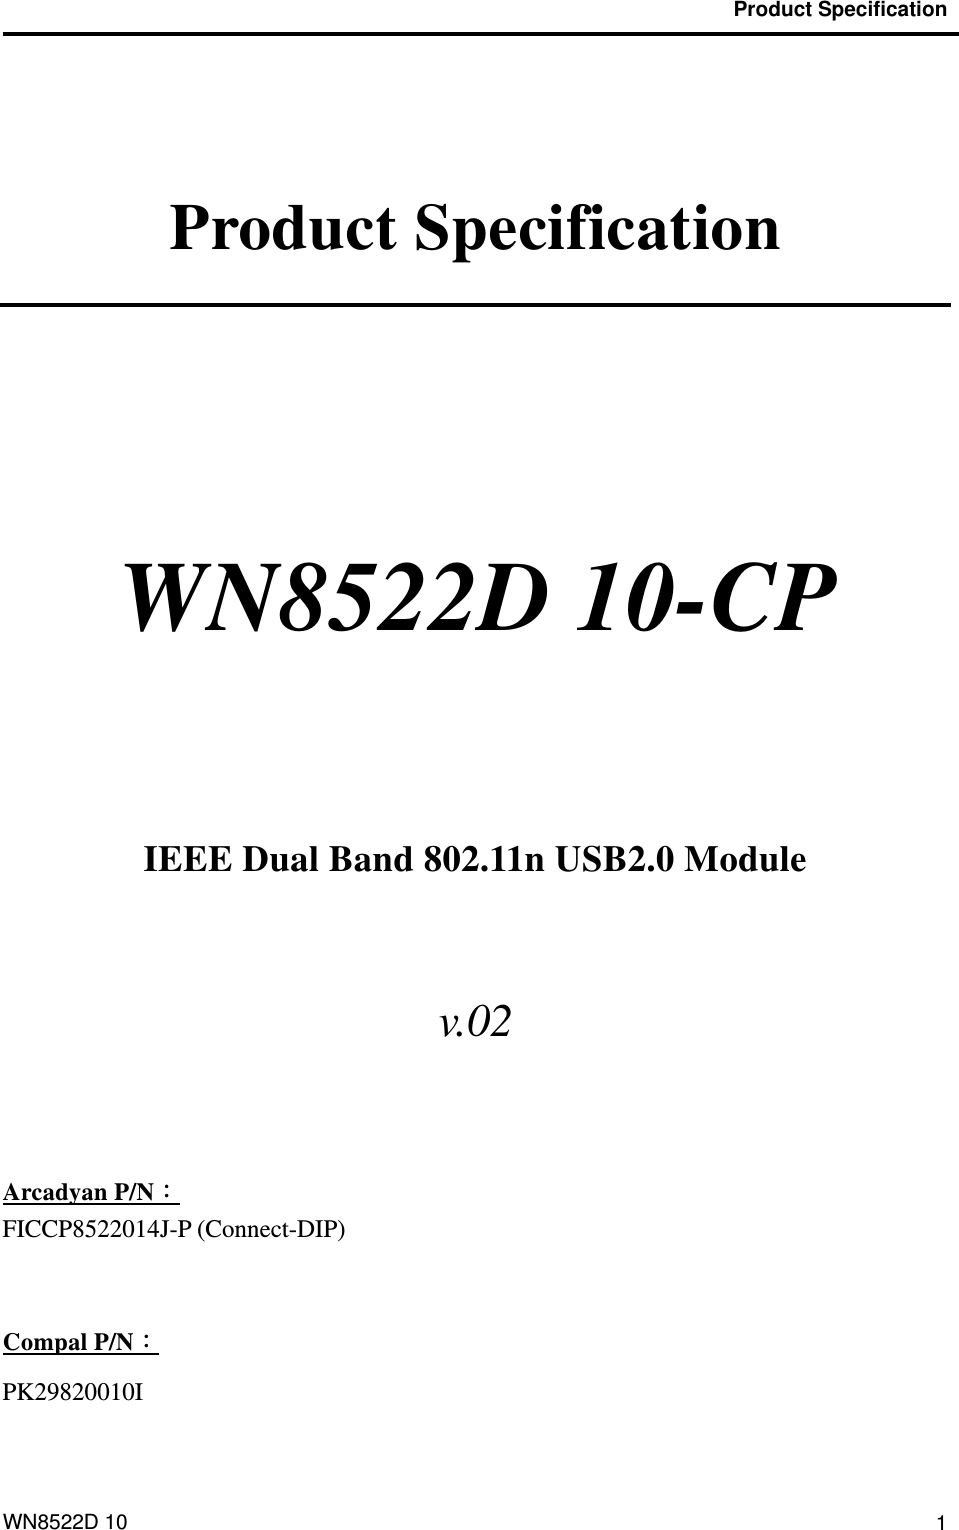                                           Product Specification  WN8522D 10  1 Product Specification   WN8522D 10-CP     IEEE Dual Band 802.11n USB2.0 Module  v.02   Arcadyan P/N： FICCP8522014J-P (Connect-DIP)   Compal P/N： PK29820010I 